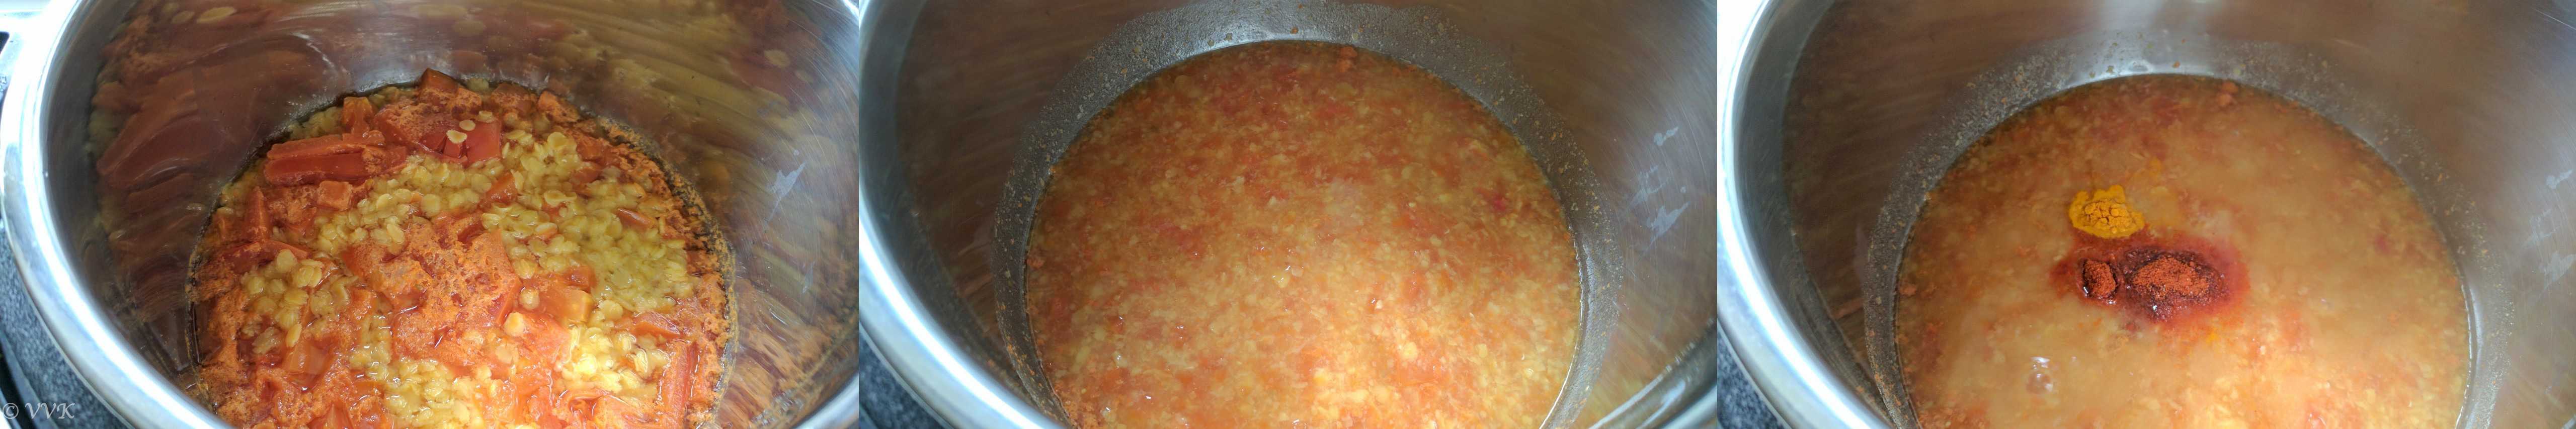 Mashed dal and tomato in the opened Instant Pot using a potato masher